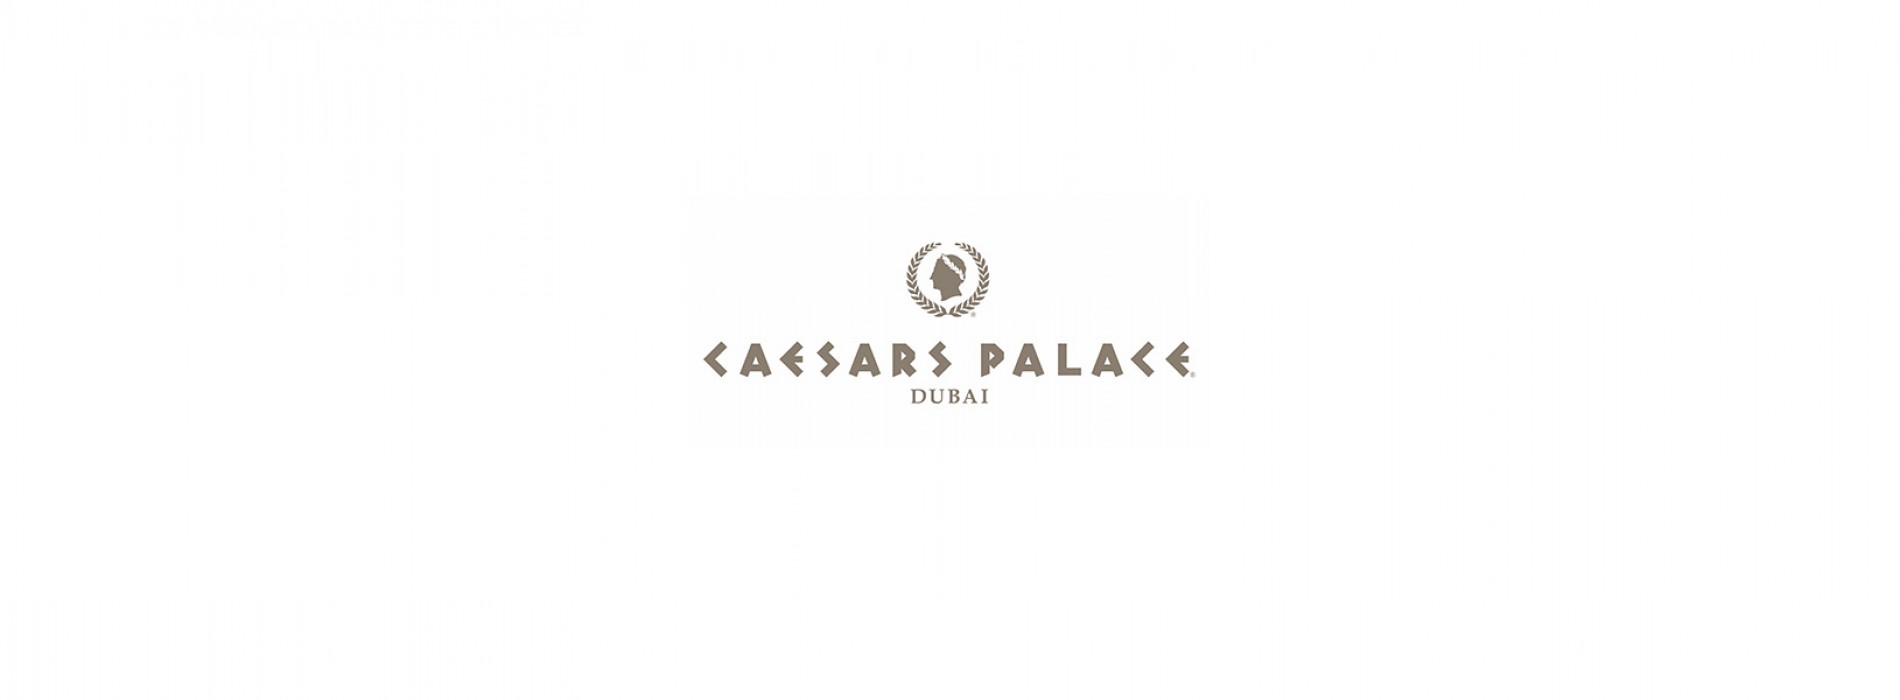 CAESARS PALACE DUBAI RECOGNIZED BY FORBES TRAVEL GUIDE 2022 STAR AWARDS WITH FIVE STAR RECOMMENDATION